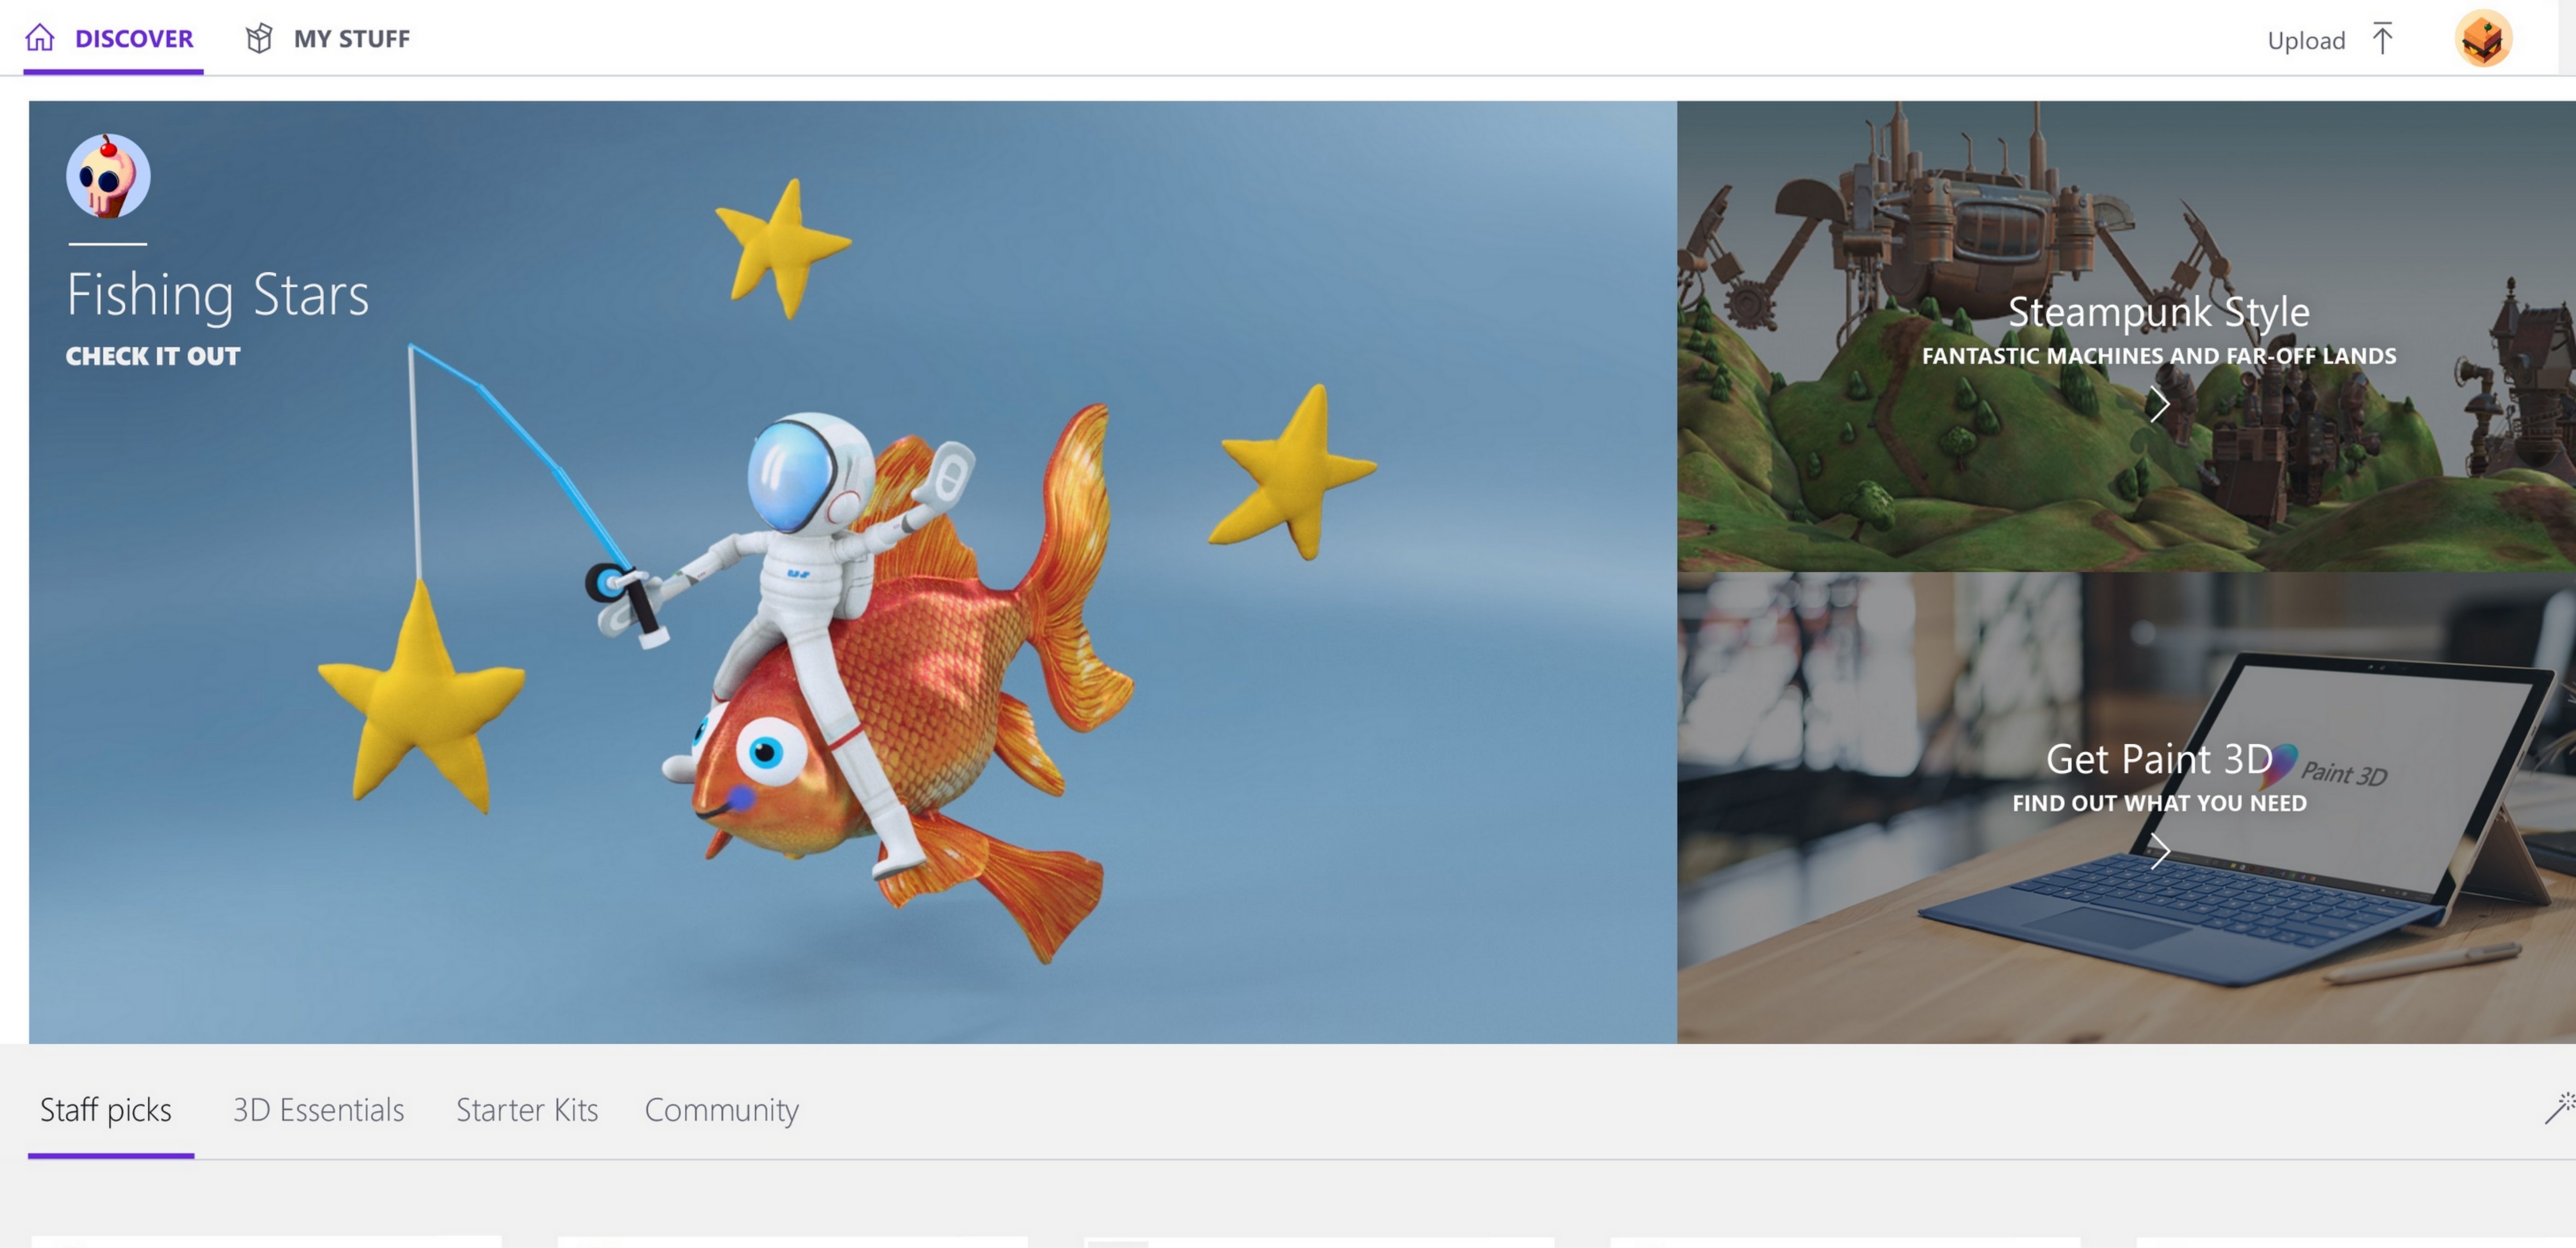 Now with the Creators Update, you have a new app called Paint 3D and access to an online creative community at Remix3D.com. The all-new Paint 3D allows you to create or modify 3D objects, easily change color or texture, or turn 2D images into 3D works of art.